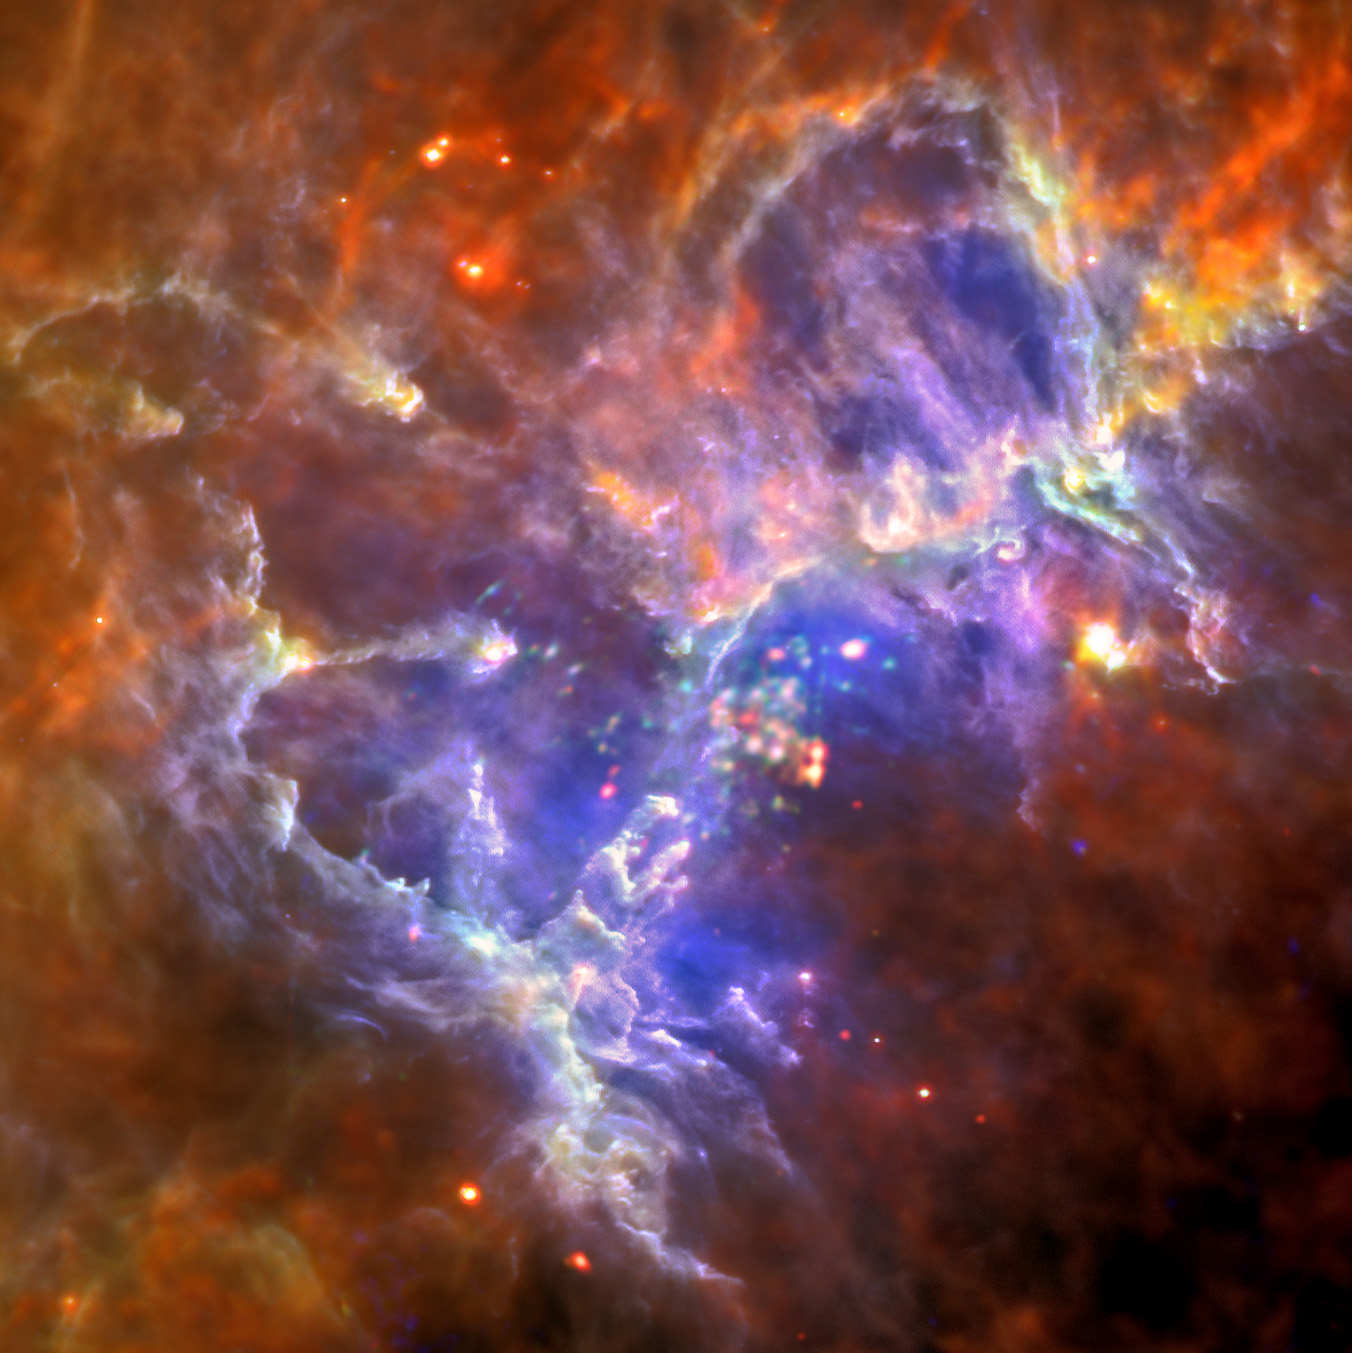 The Eagle Nebula (M16) as seen by Herschel and XMM-Newton